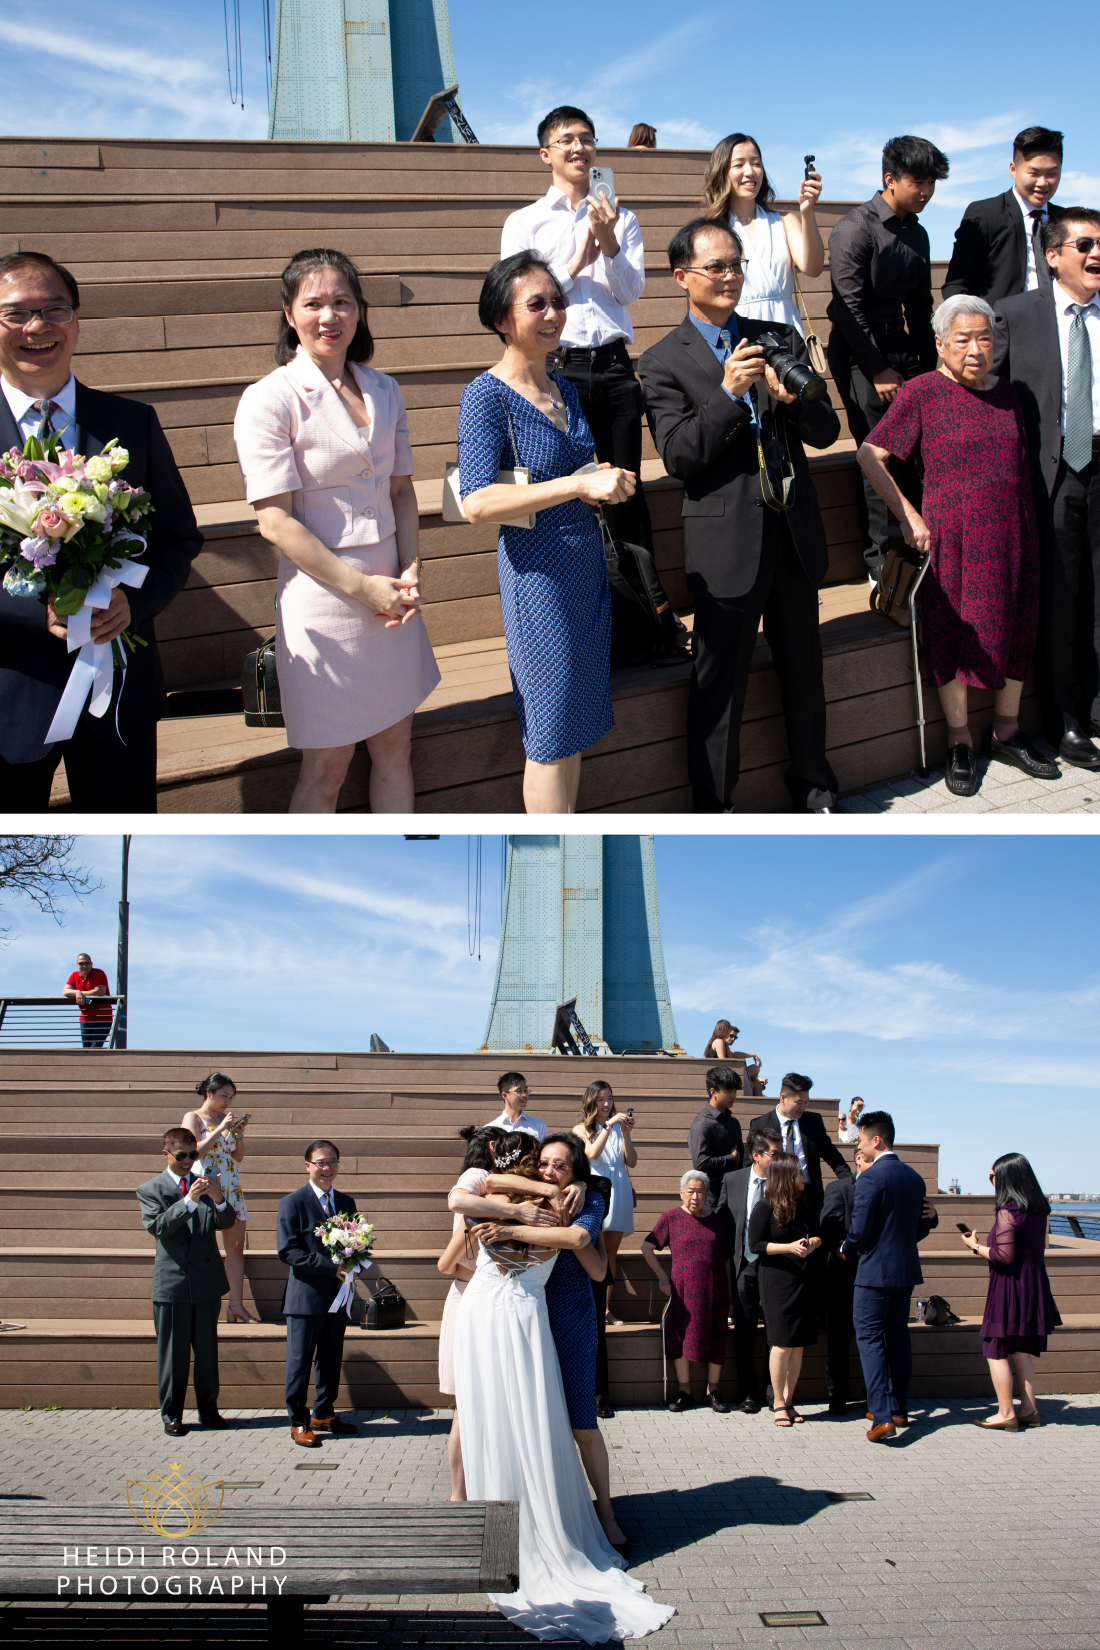 Family smiling and celebrating Race Street Pier wedding